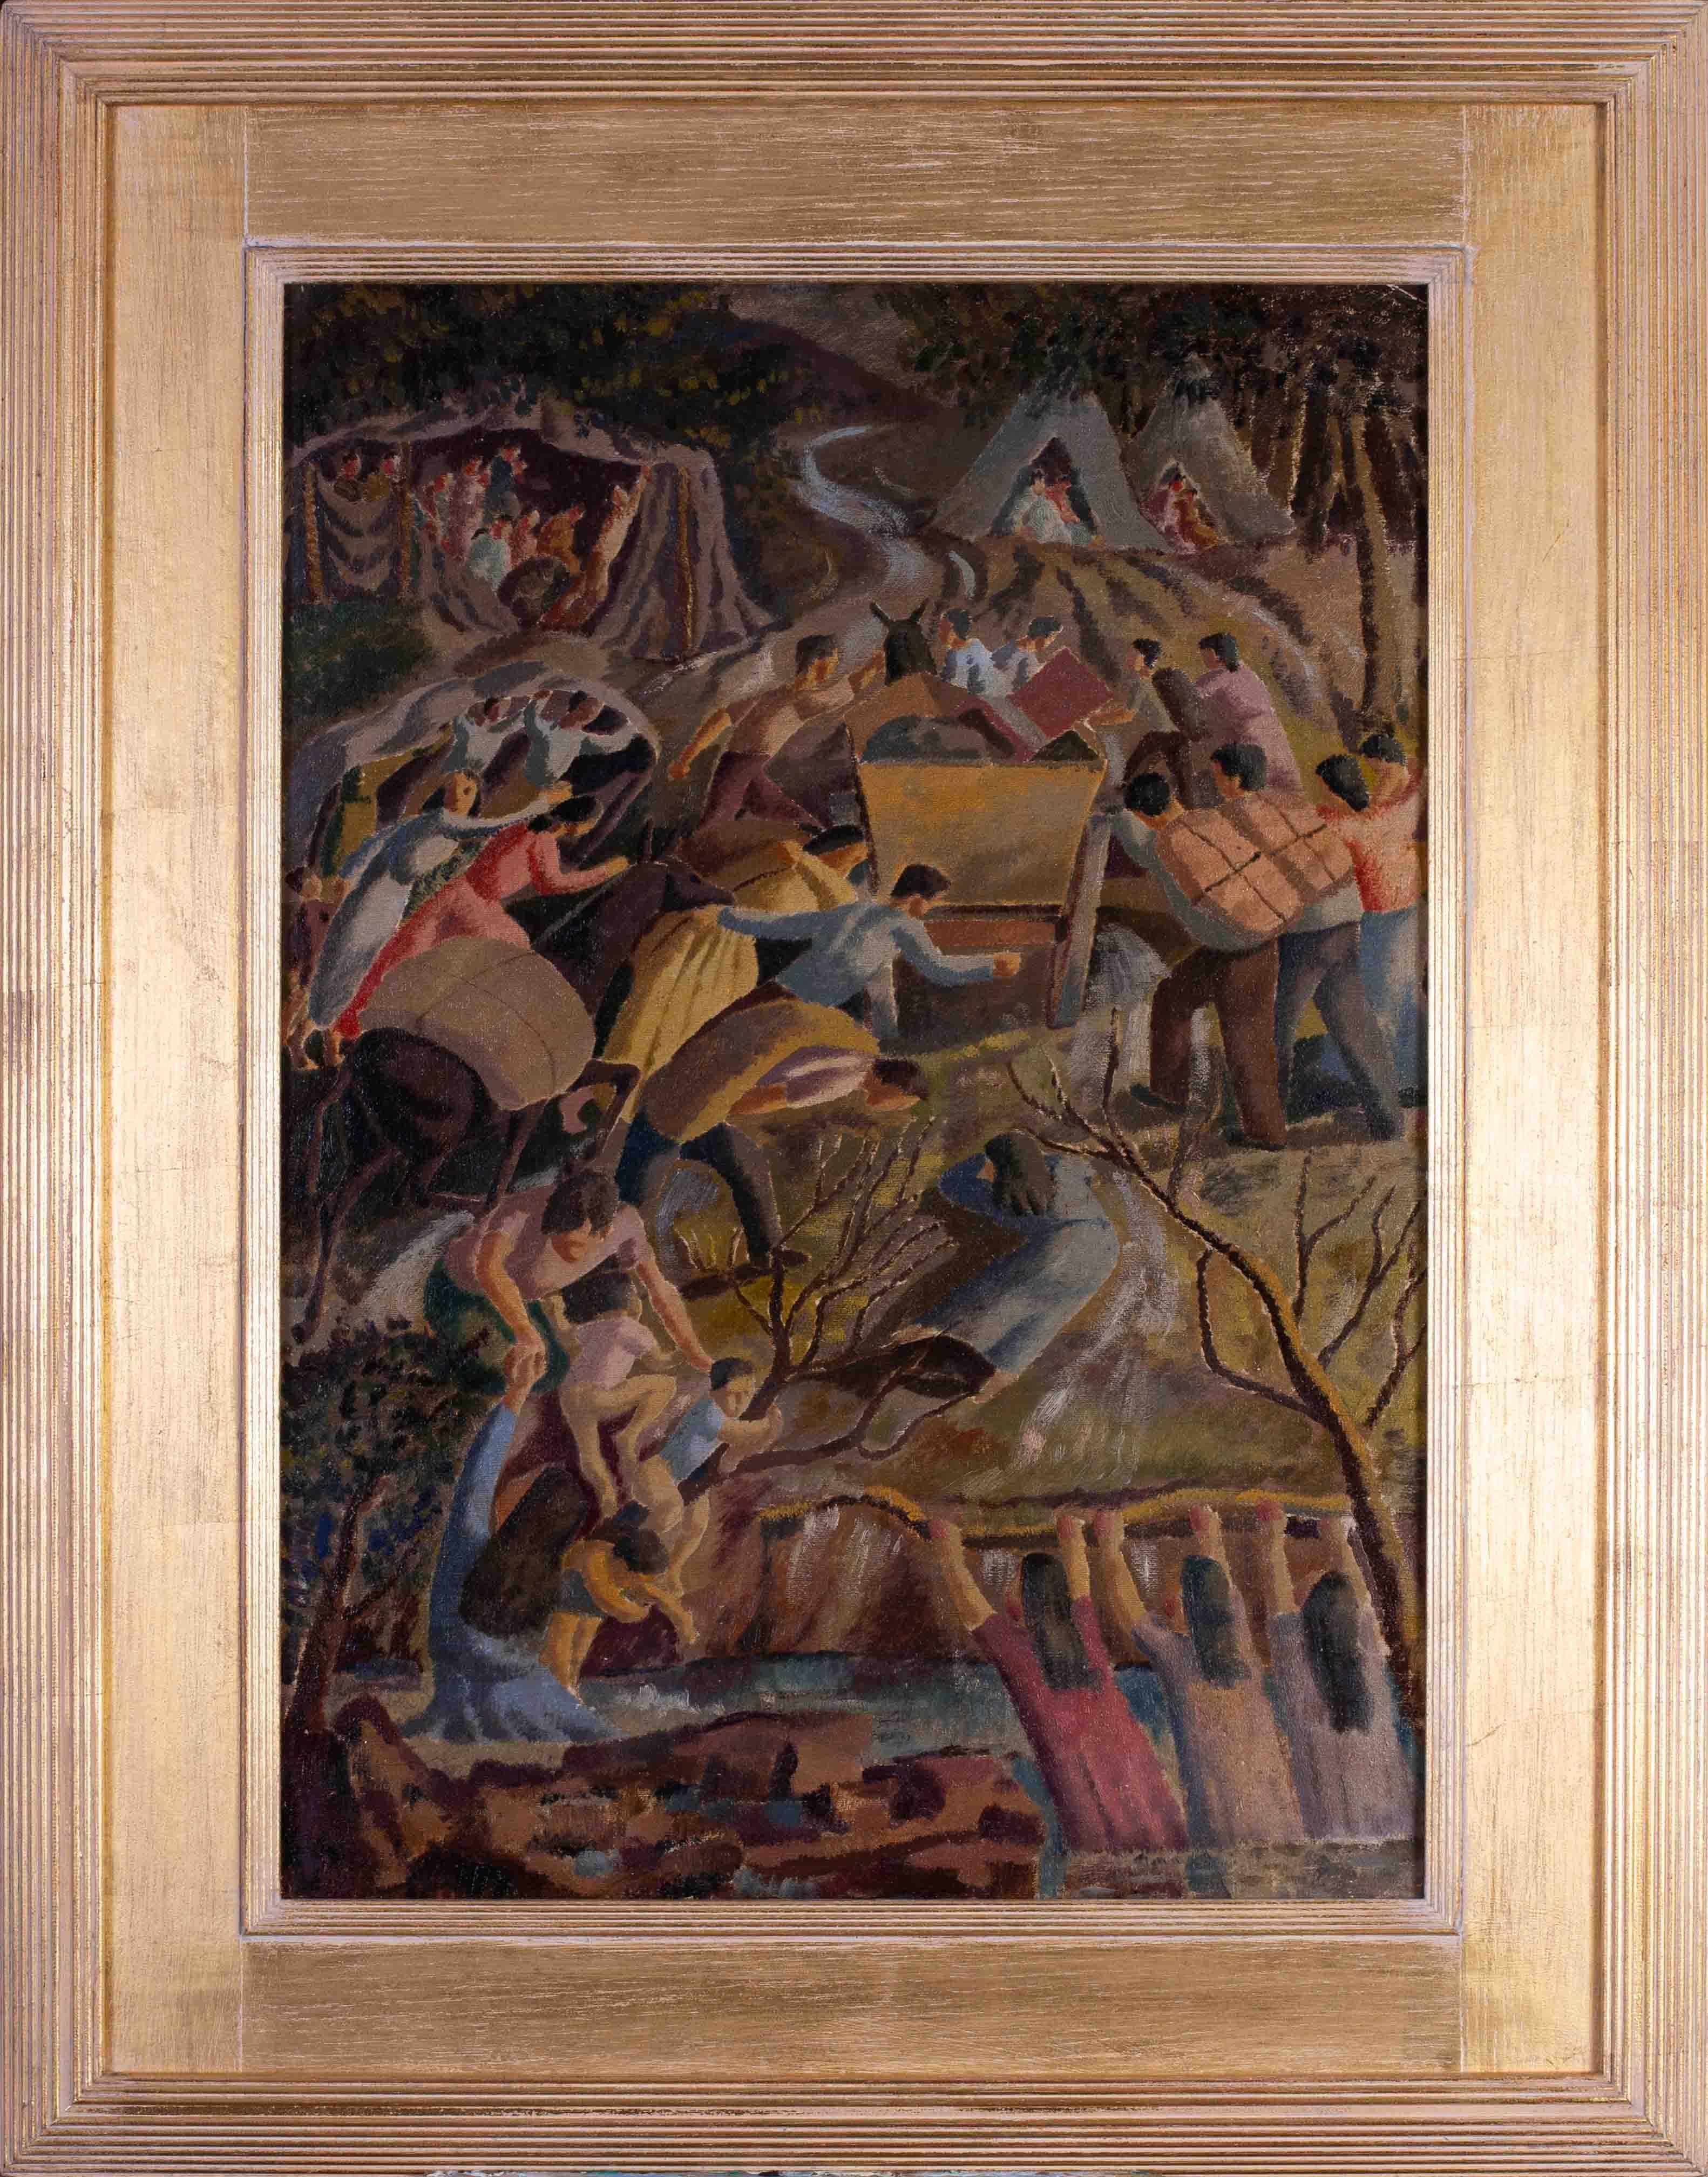 British 20th Century oil painting of 'The promised land' by Thomas Saunders Nash